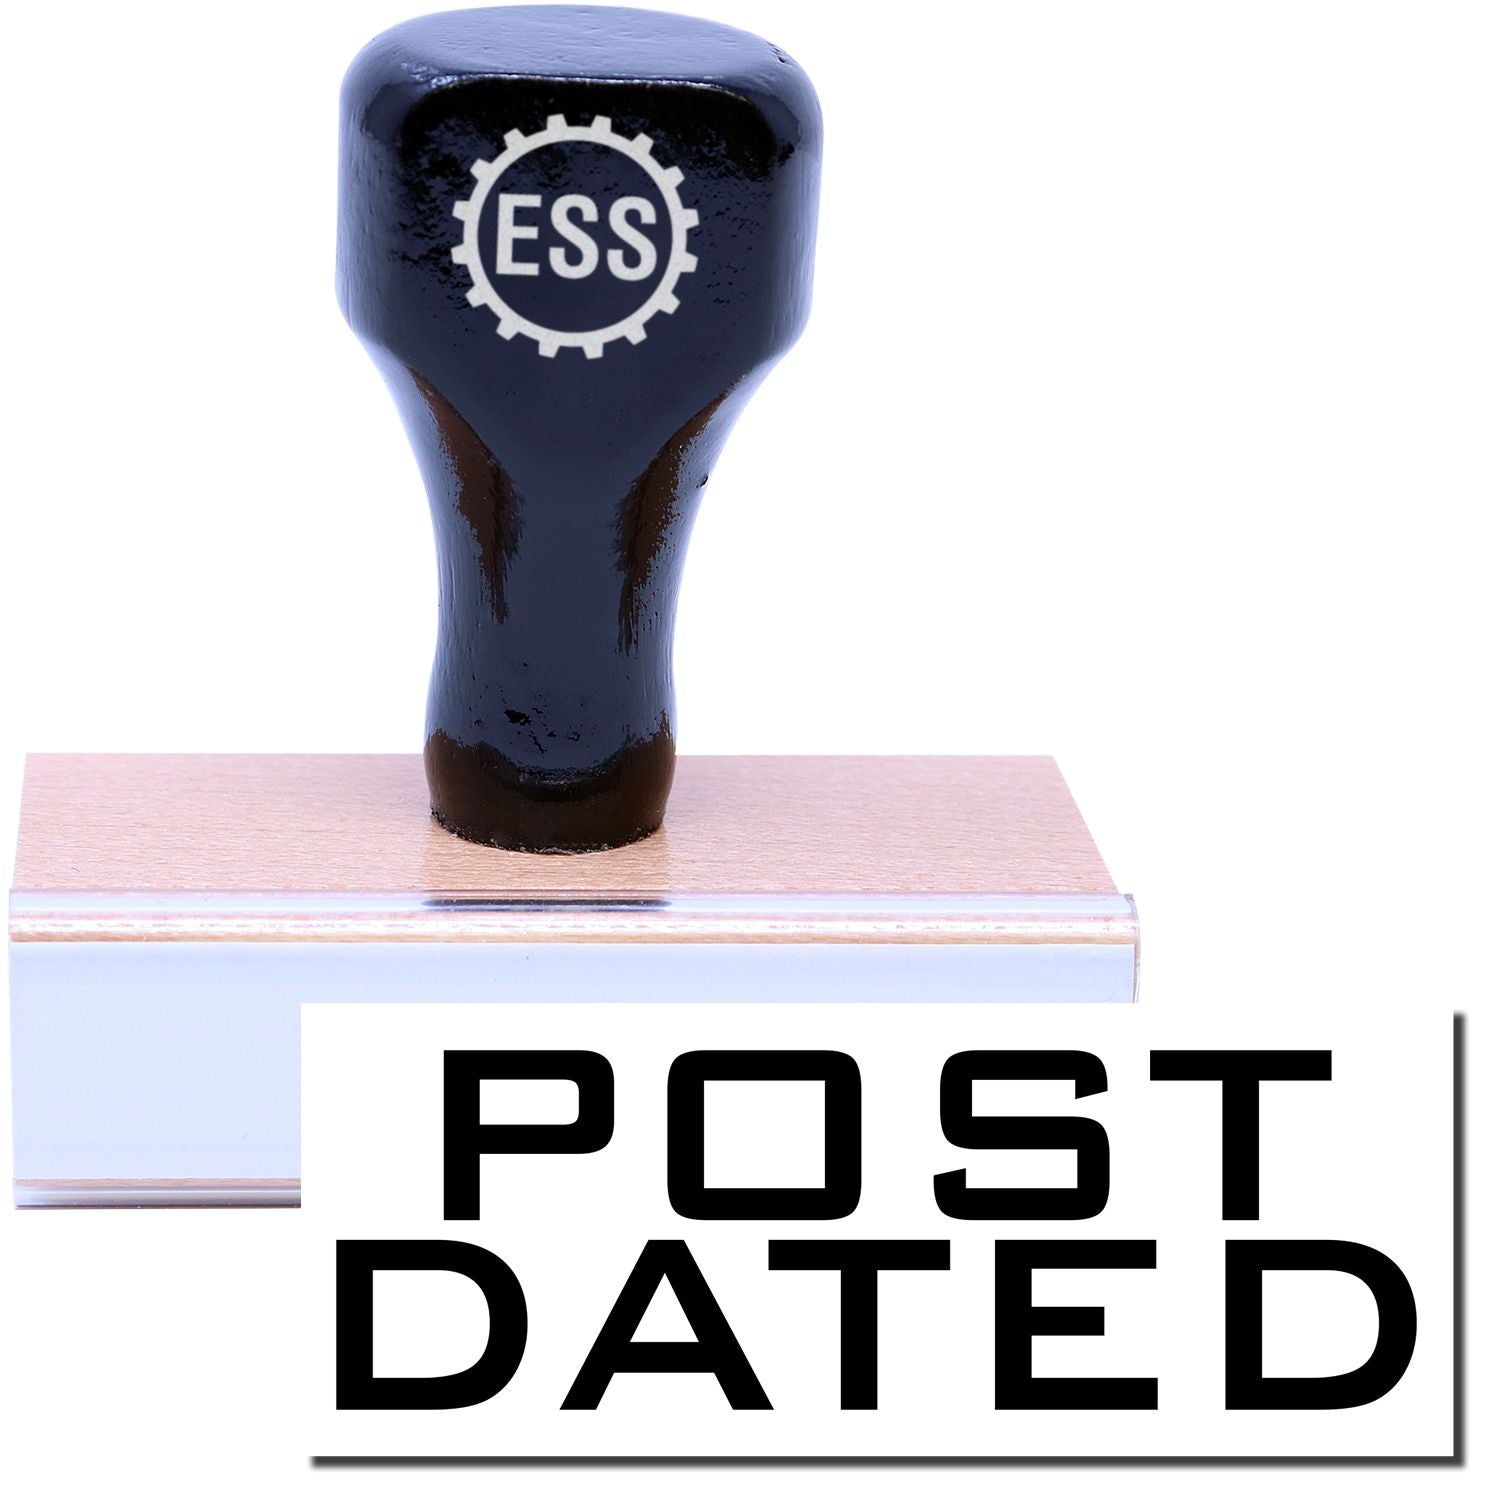 A stock office rubber stamp with a stamped image showing how the text "POST DATED" in a large font is displayed after stamping.